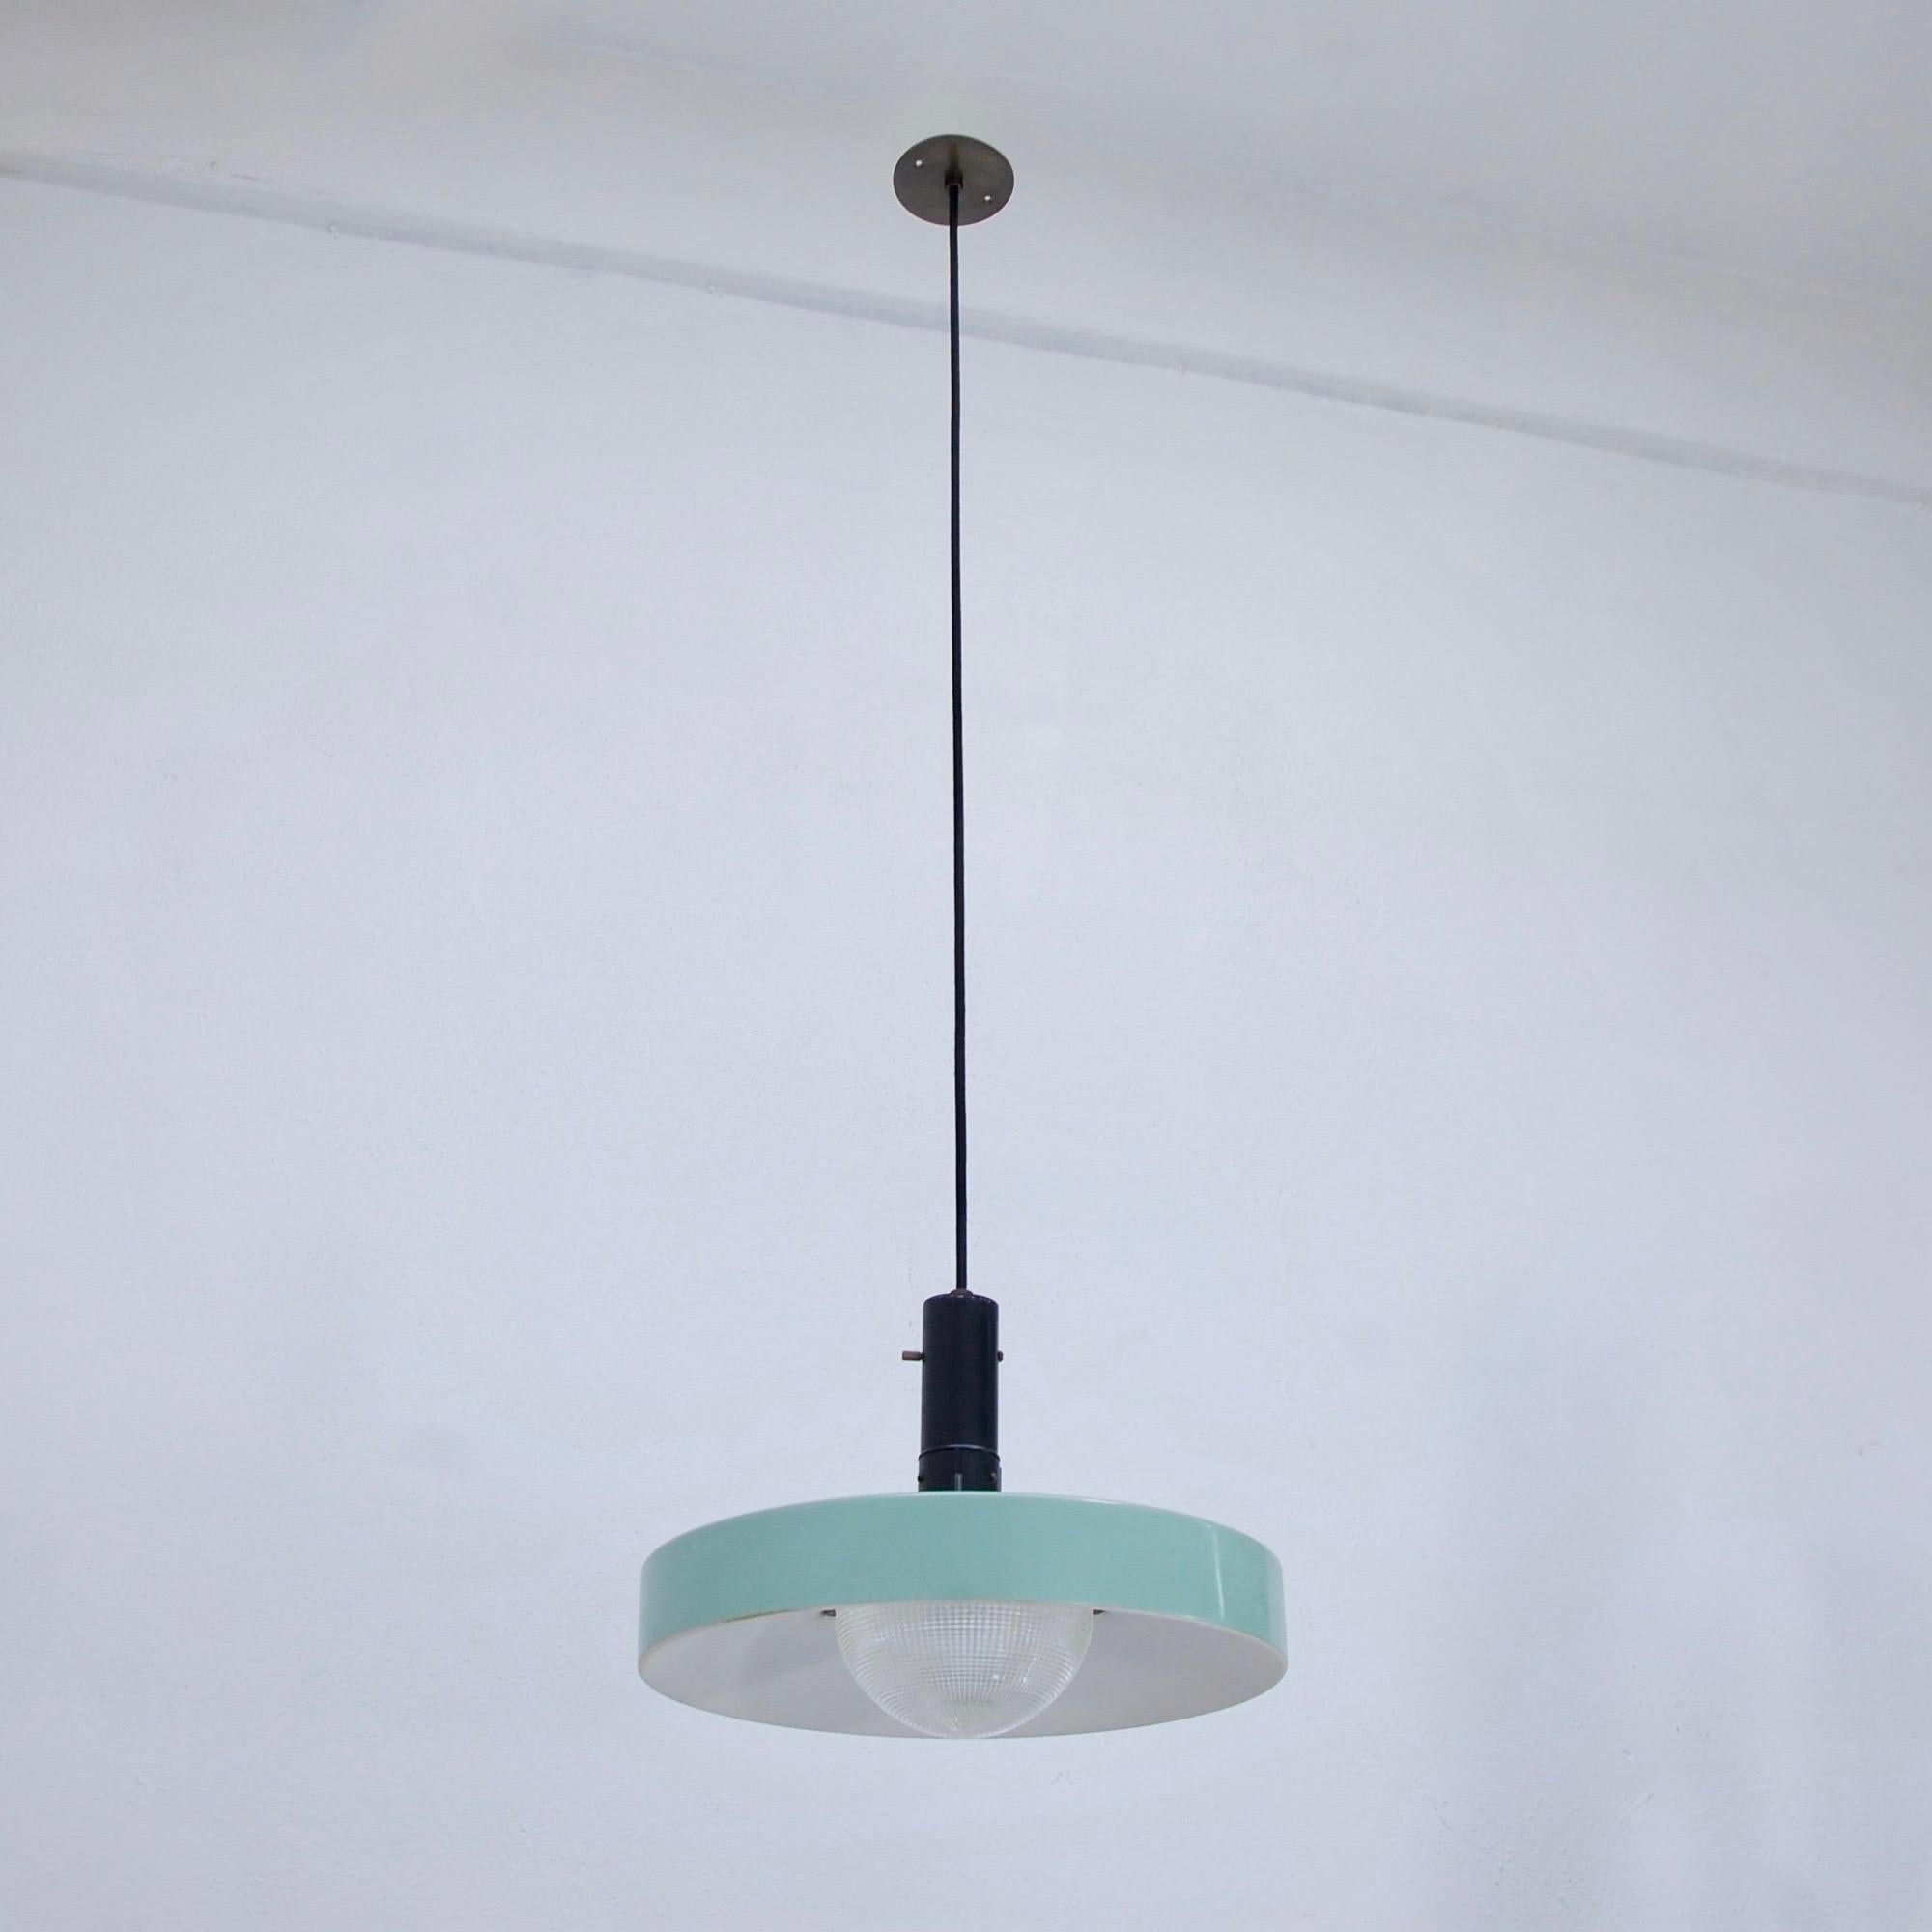 1950s, modern and sleek green industrial pendant by Stilnovo of Italy. Painted aluminium, holopane glass, painted steel and brass. Two small blemishes on glass (see image) but no cracks. Single E26 medium based light socket. Overall drop adjustable.